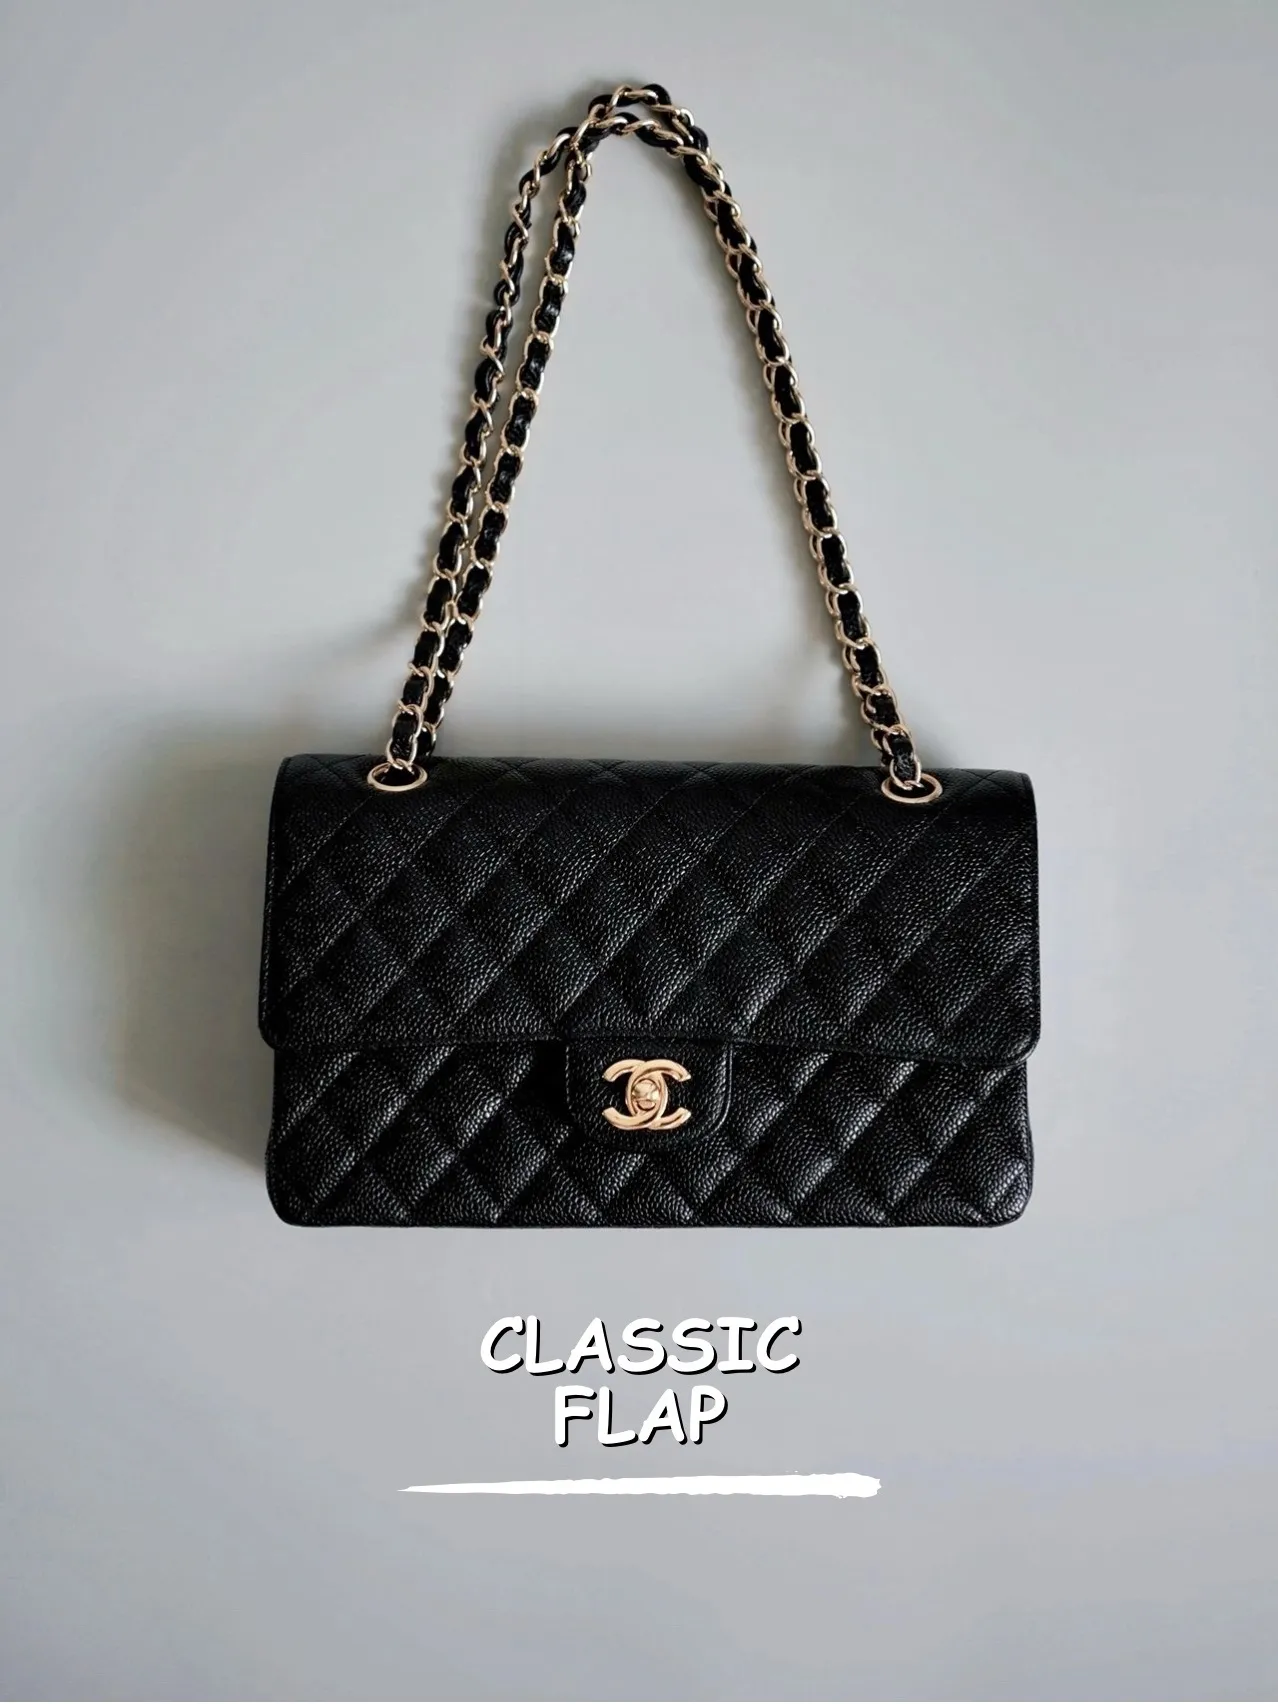 CHANEL classic flap handbag unboxing and review, small white caviar